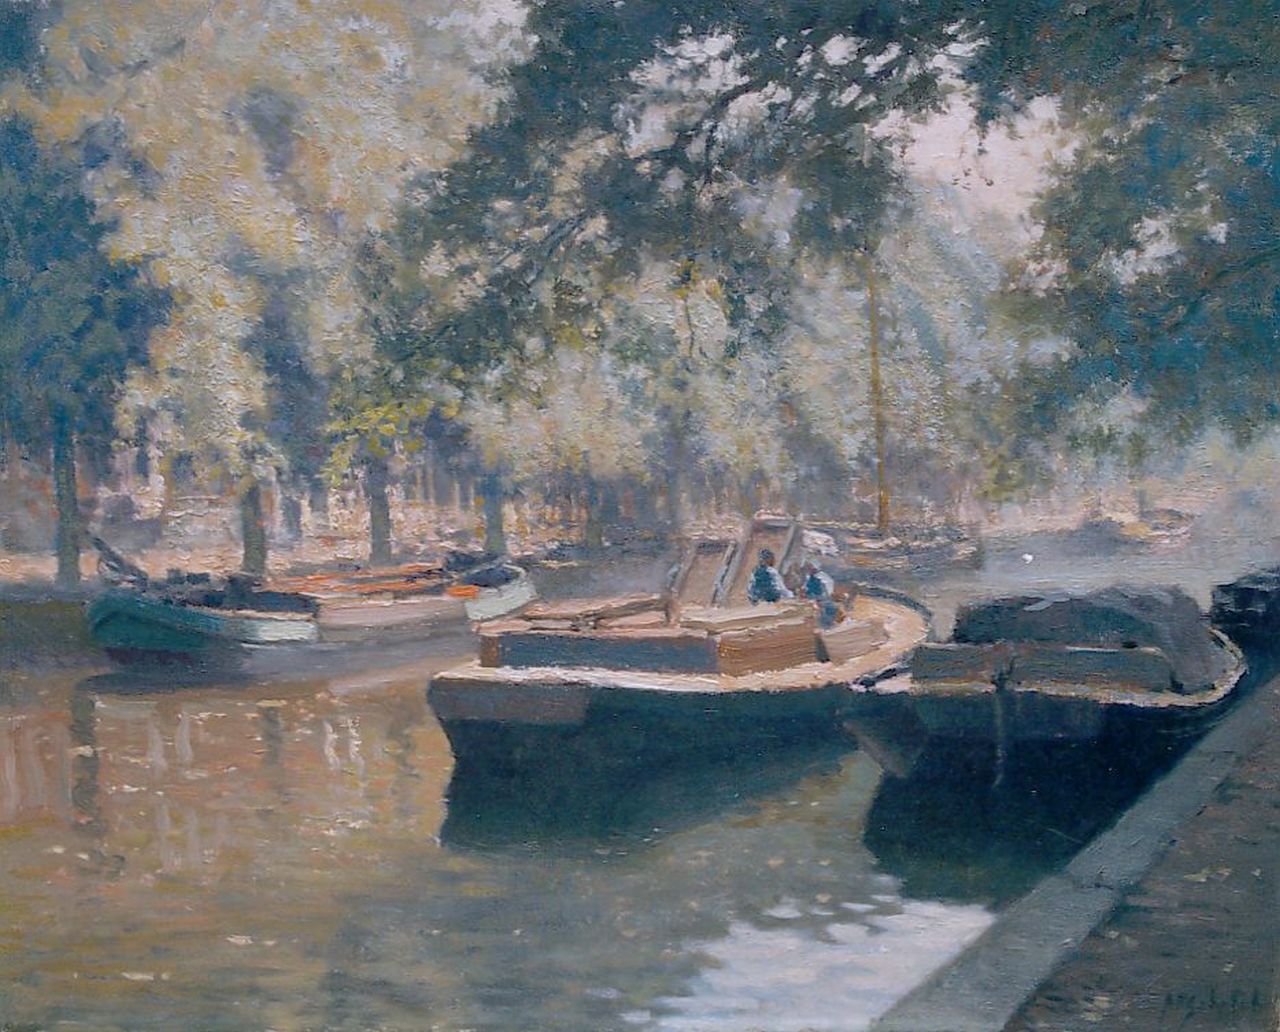 Schotel A.P.  | Anthonie Pieter Schotel, Canal with moored boats, oil on canvas 40.1 x 50.3 cm, signed l.r.